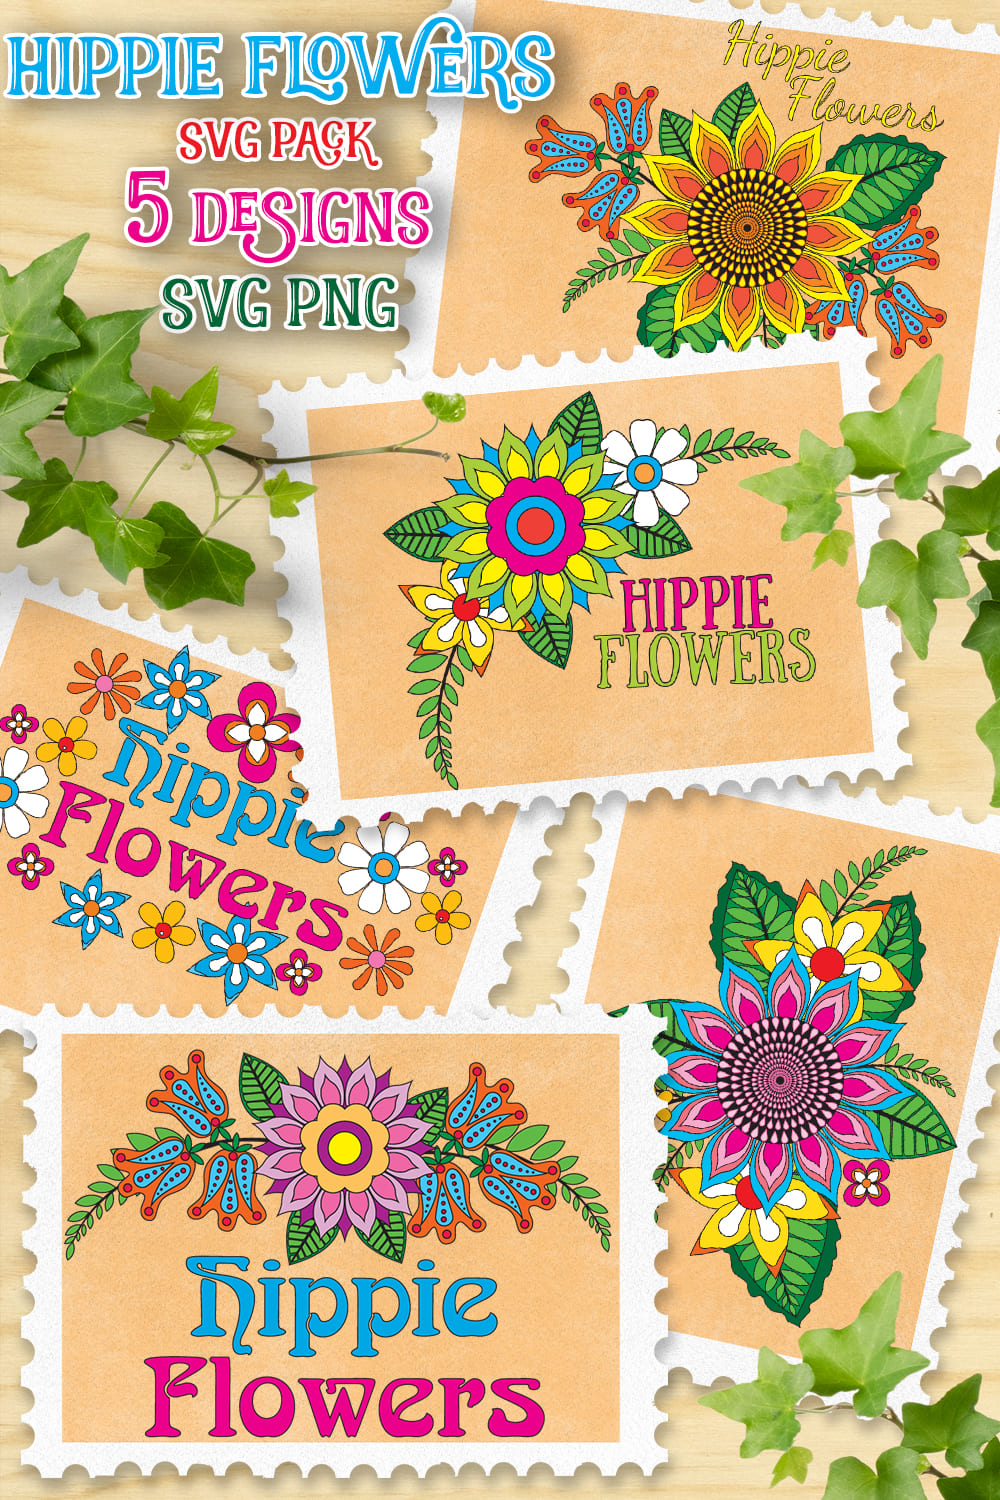 Colorful flowers for the hippies mood.